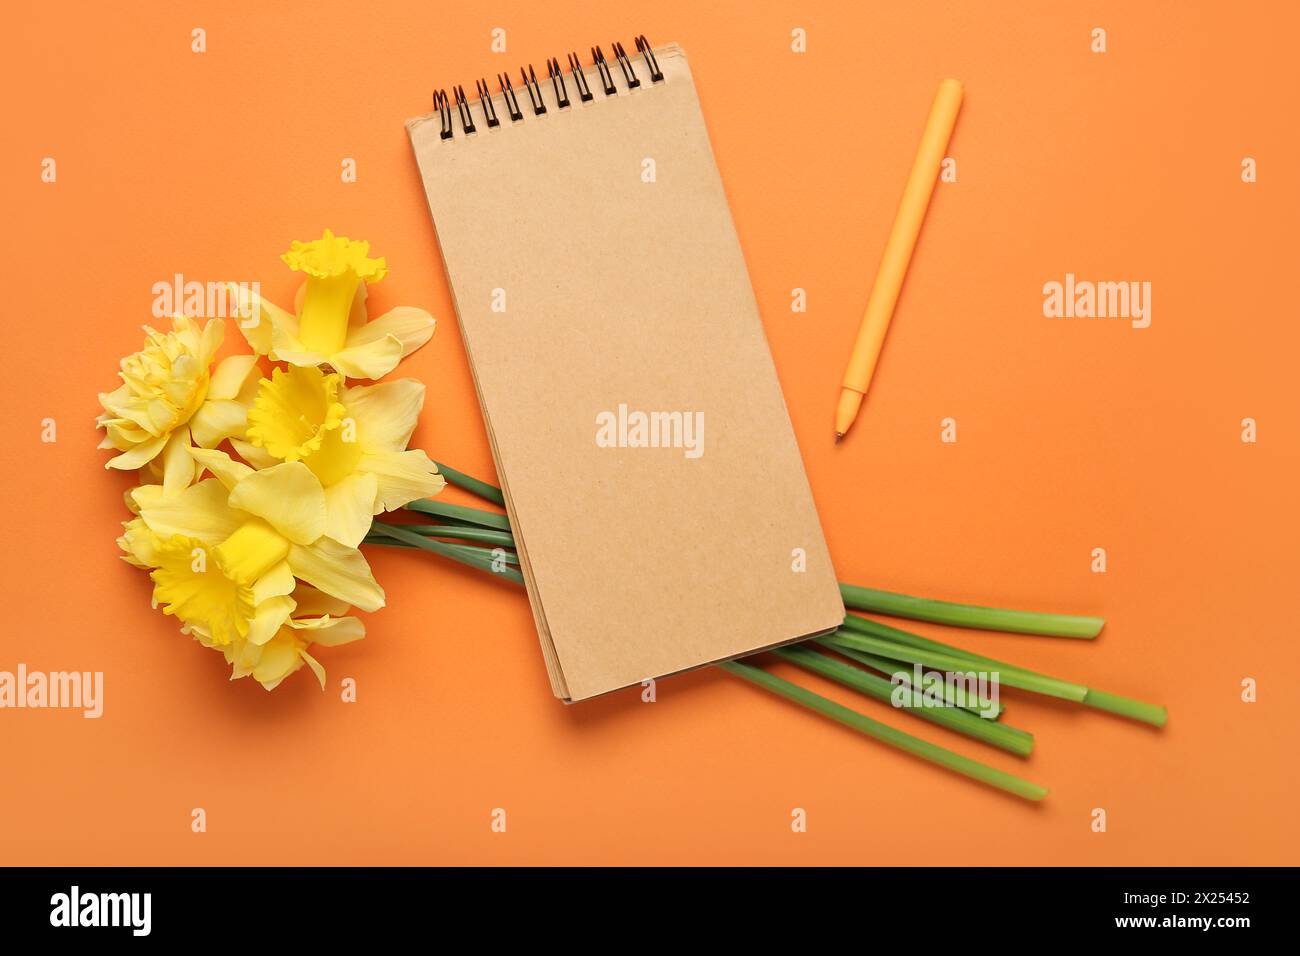 Daffodil flowers and notebook with pen on orange background. Top view Stock Photo